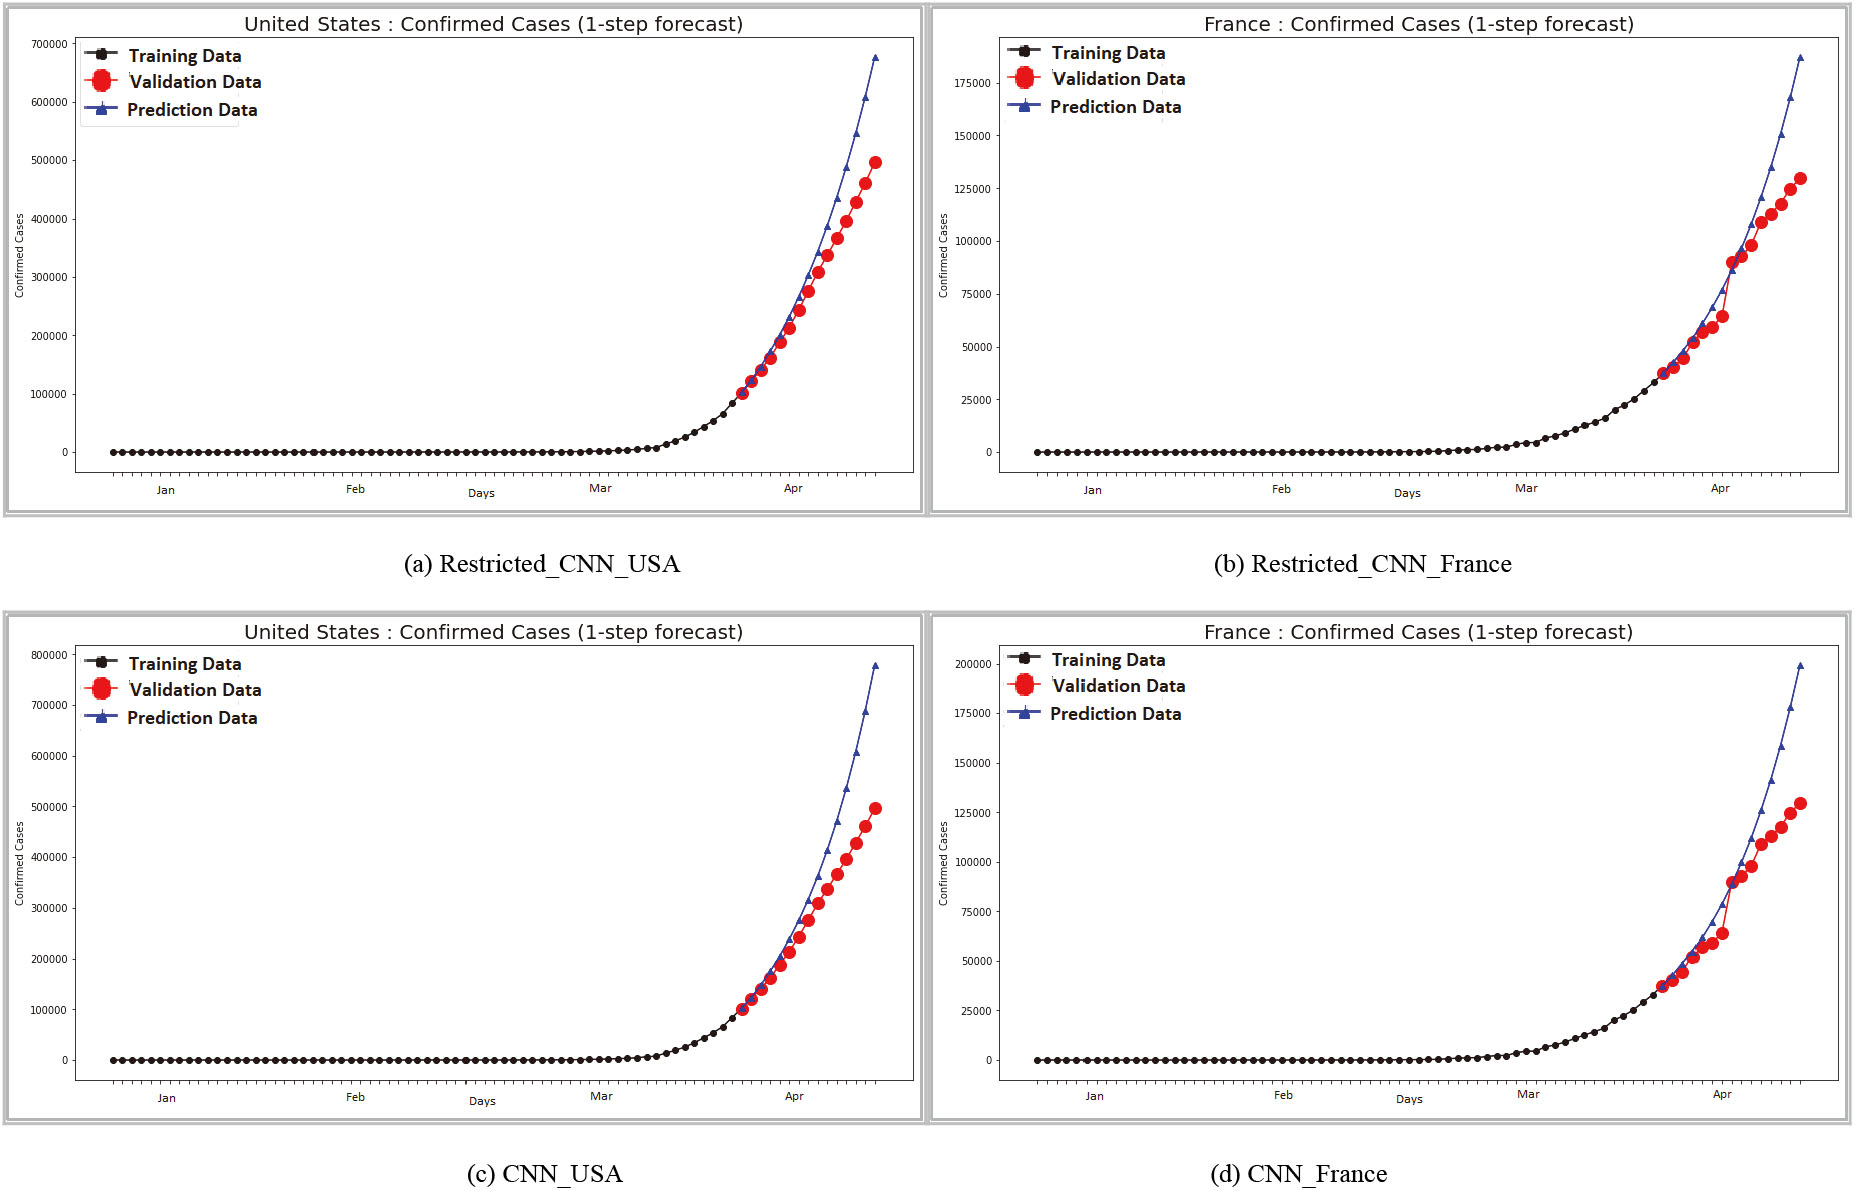 Comparison of RRCNN, ST-LSTM, ST-GRU and CNN predictions across countries [legends: training data (black), validation data (red), predicted data (blue)].